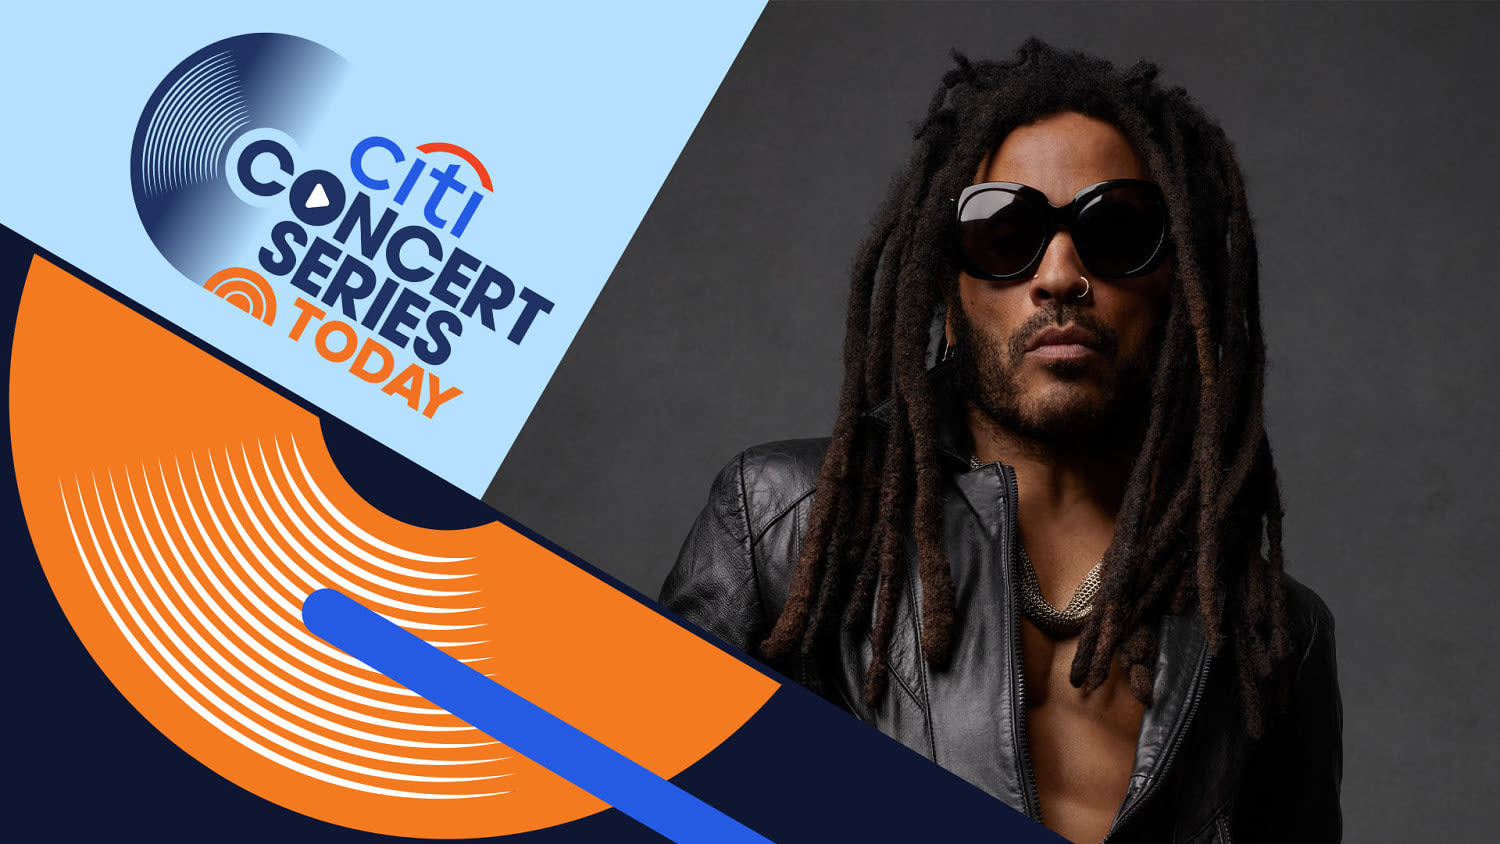 Lenny Kravitz concert on TODAY: What you need to know